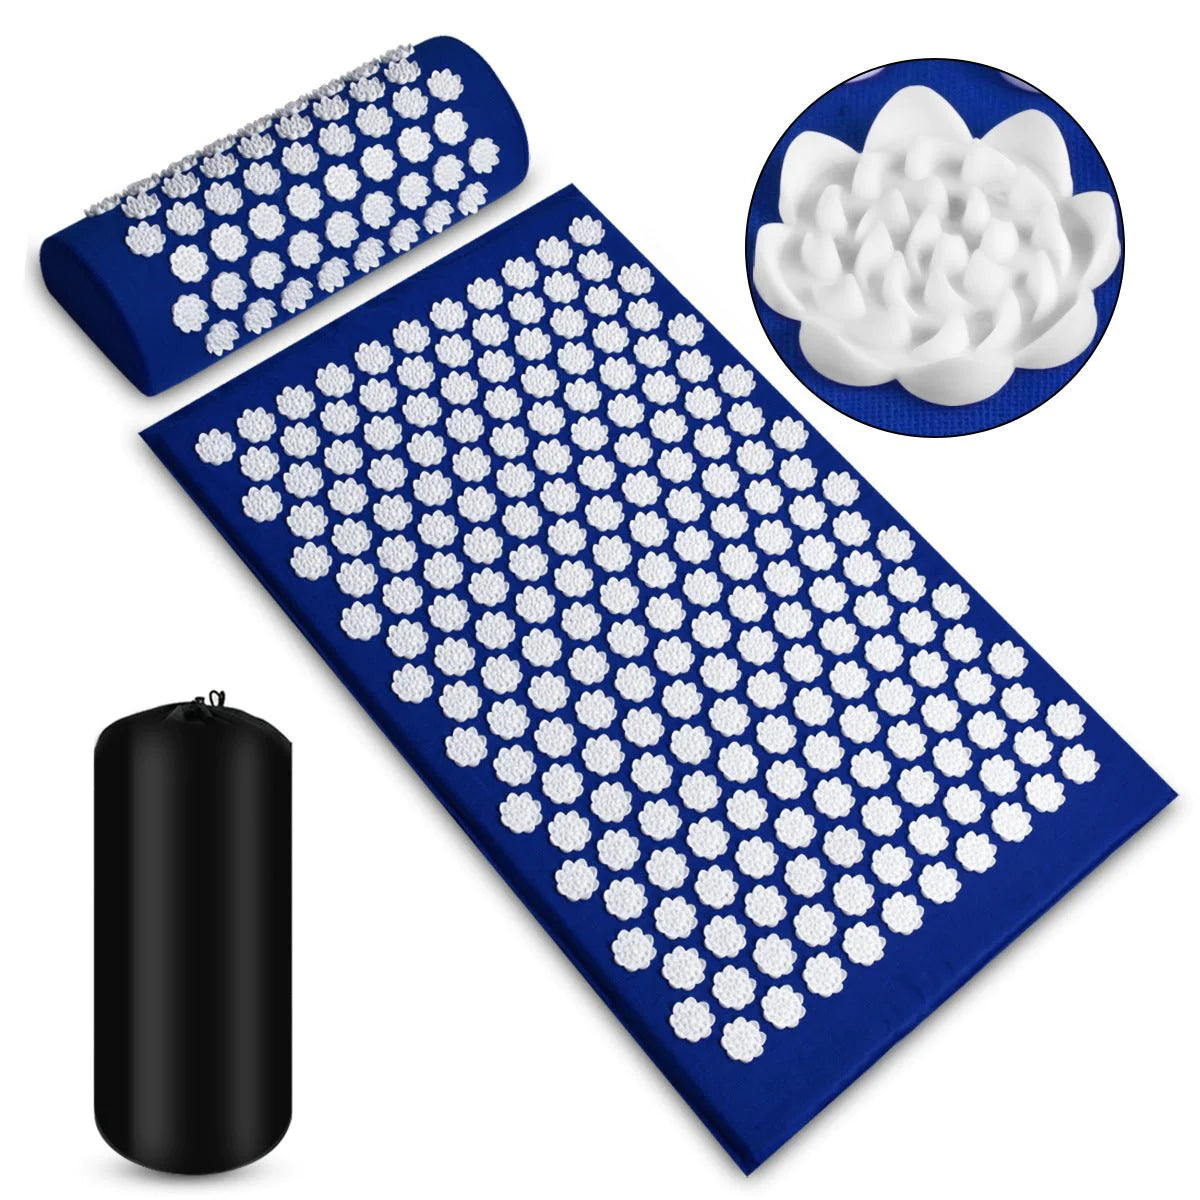 Lotus Yoga Mat with Therapeutic Massage Points